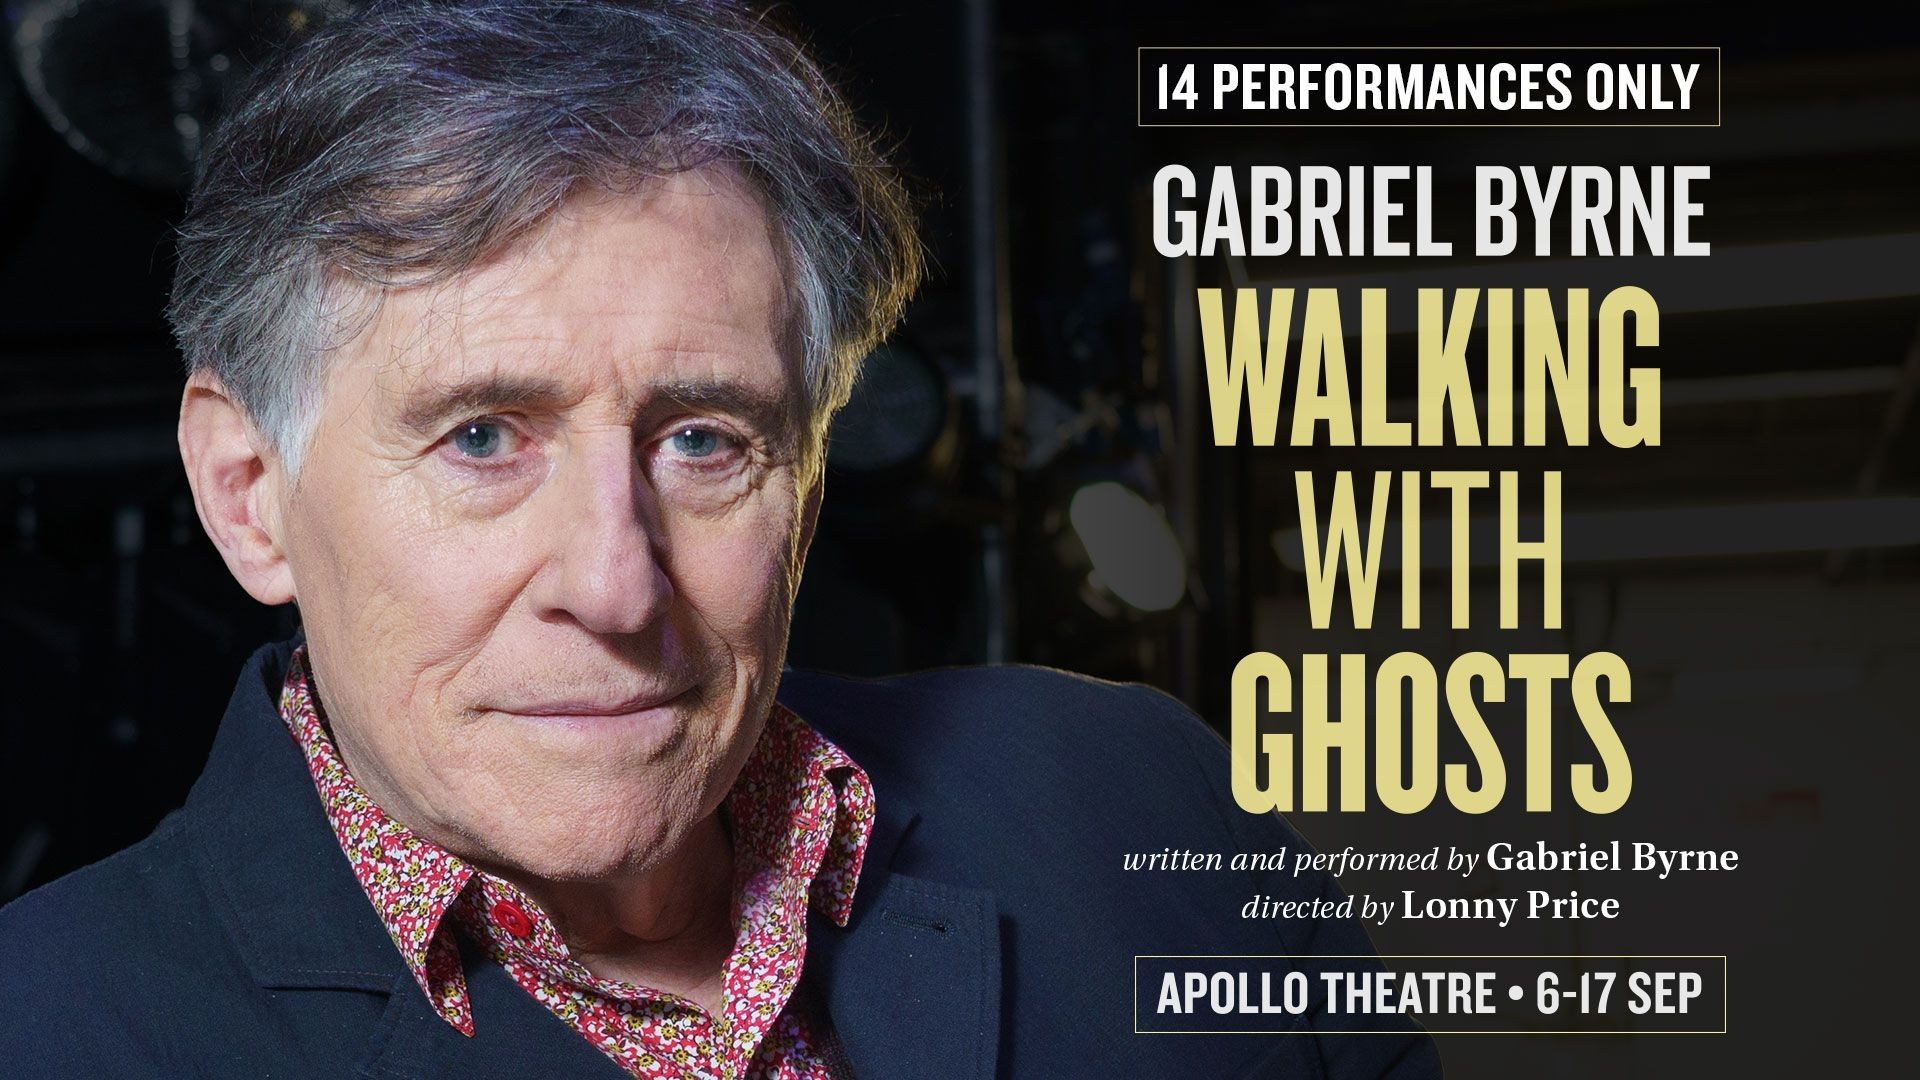 Watch the finest performer in Ireland recount the stories of his life and childhood days. Buy 'Walking With Ghosts' tickets.